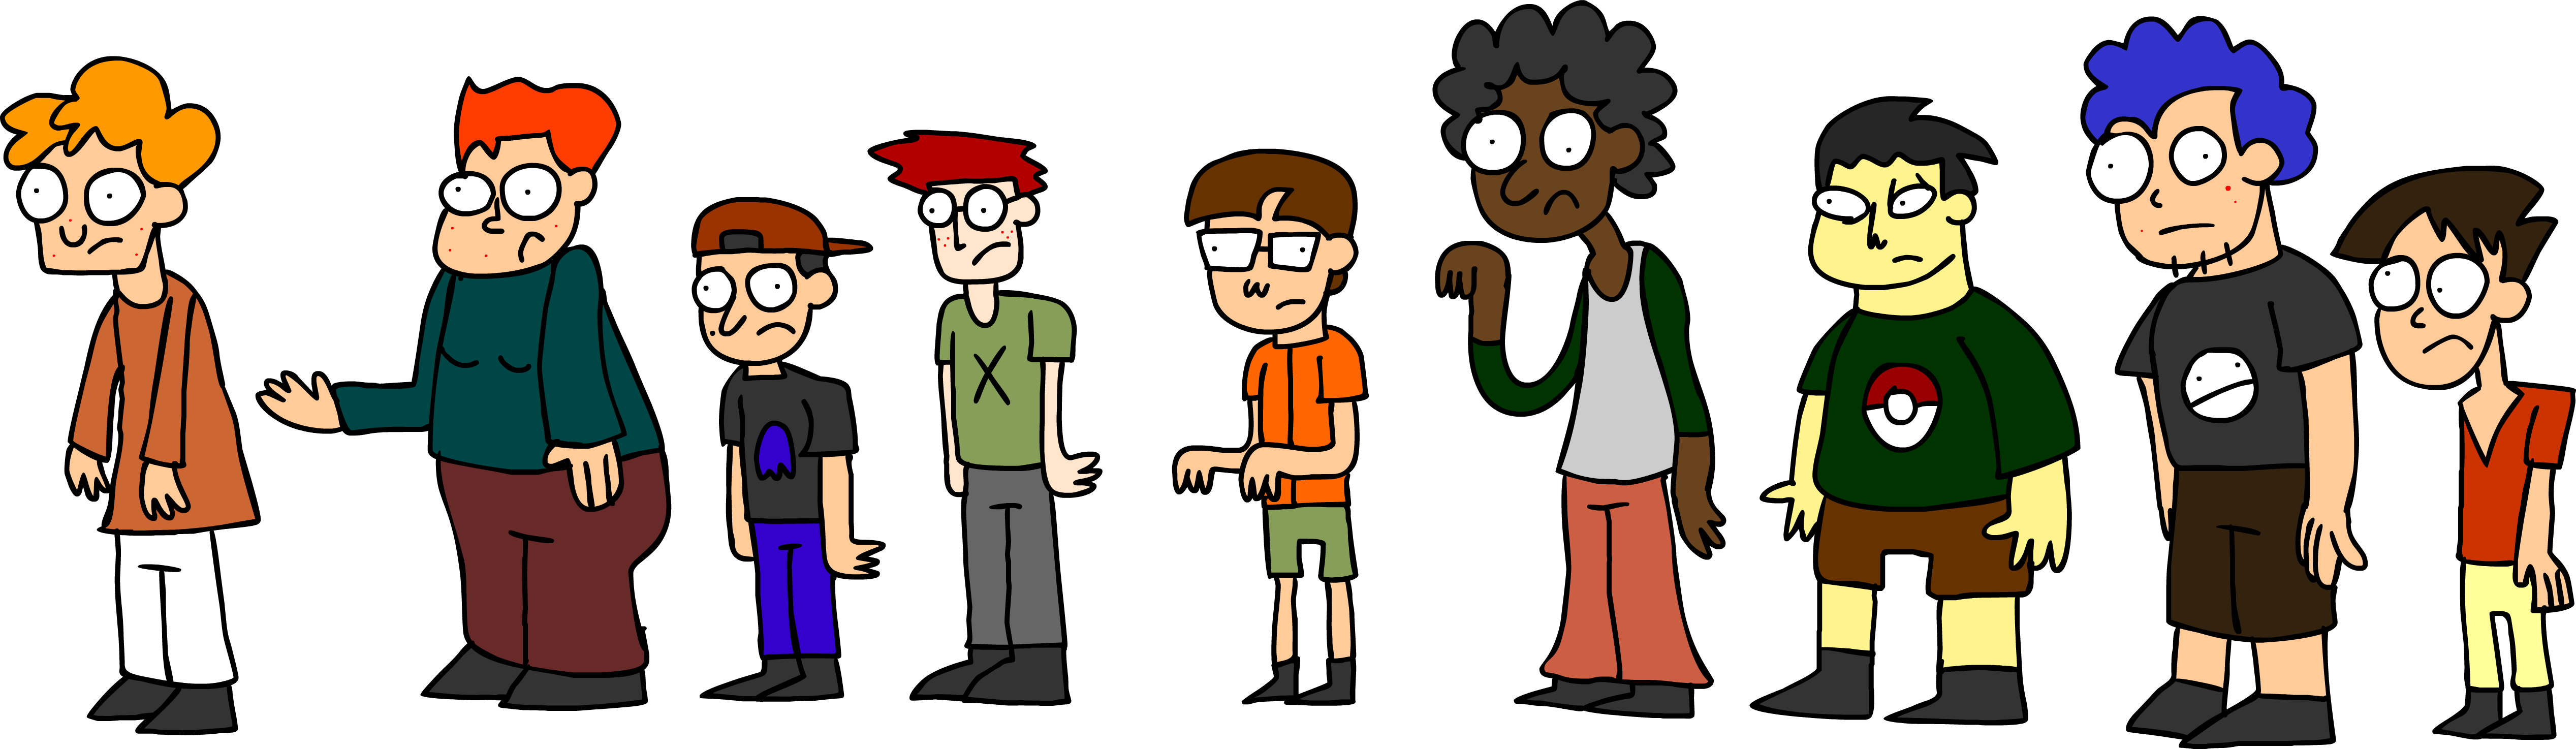 A o nerds by. Group clipart bunch